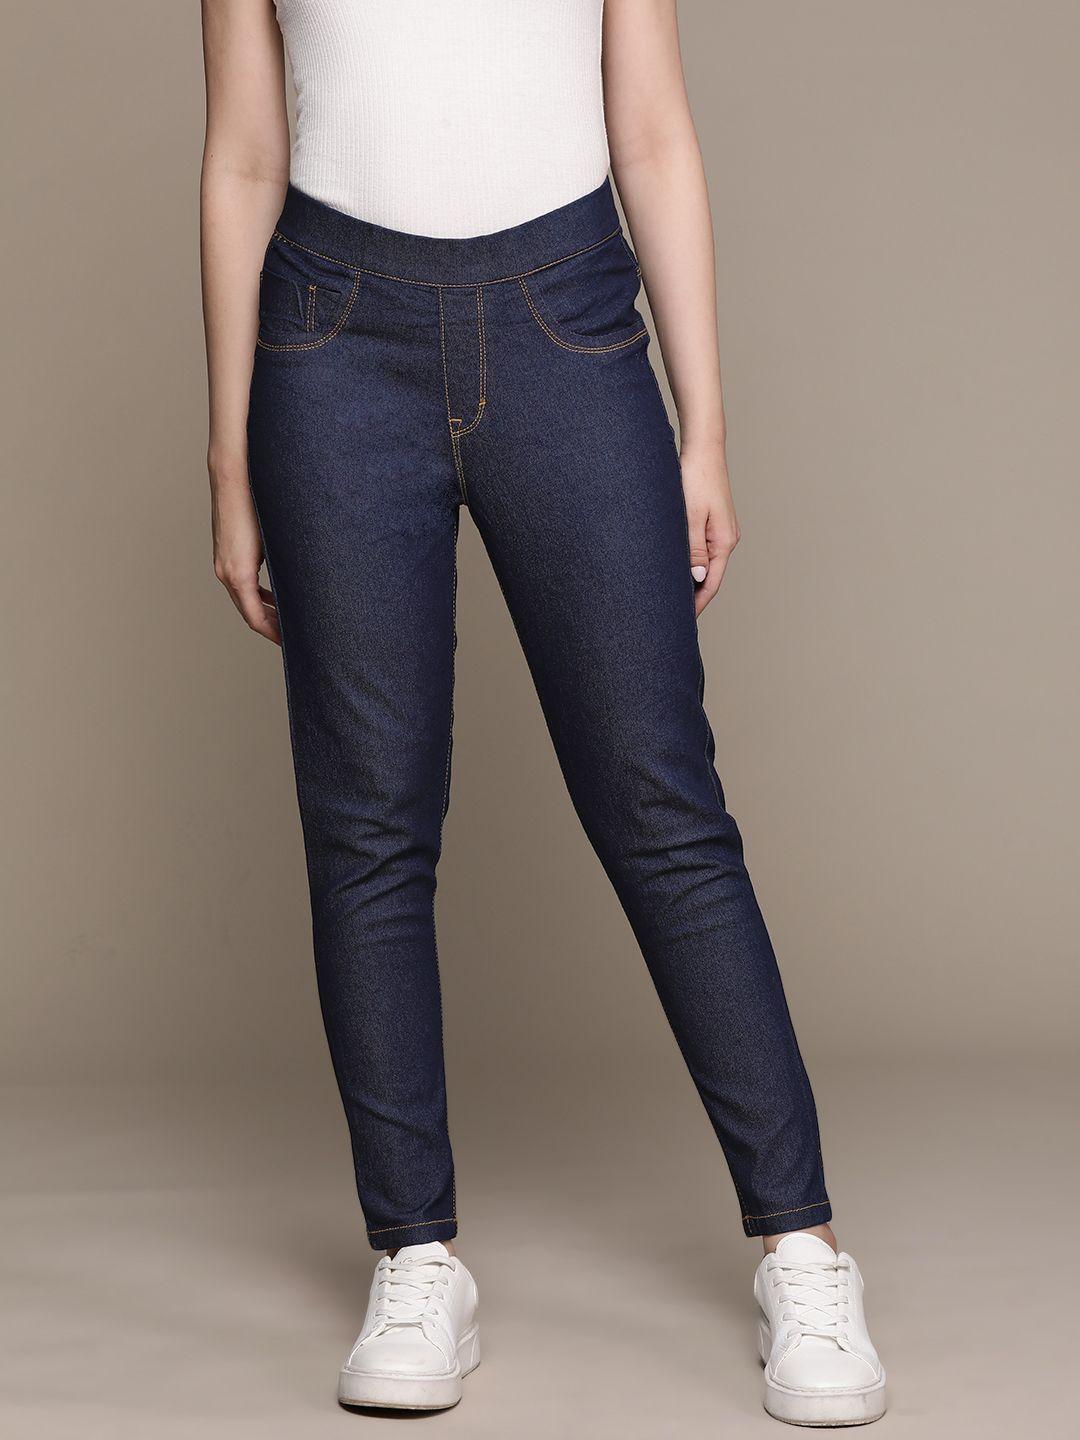 The Roadster Lifestyle Co. Women Slim Fit Stretchable Jeans